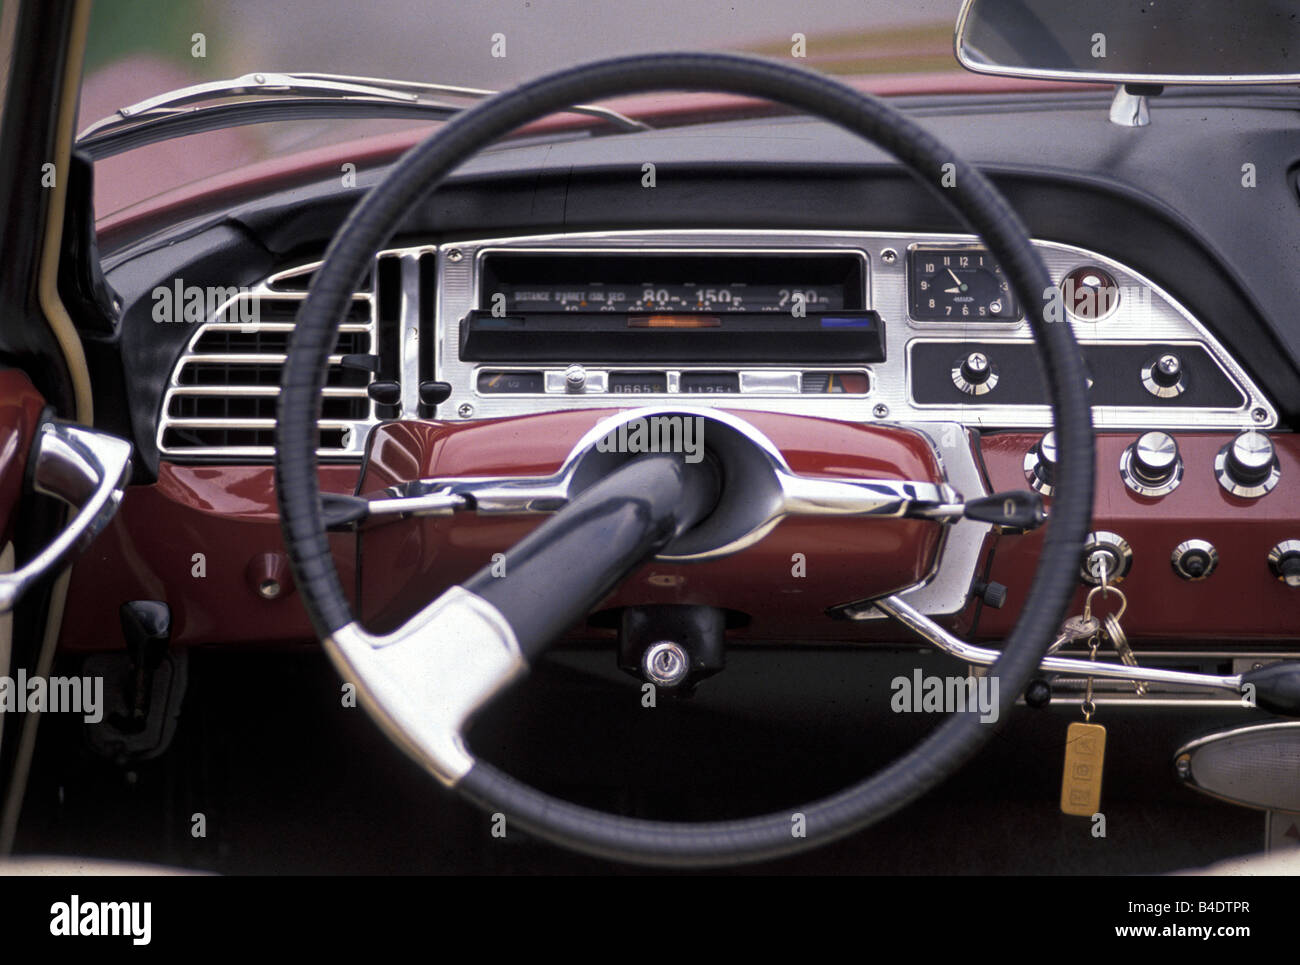 Car, Citroen DS Convertible, model year 1961-1965, Vintage approx., sixties, red, Interior view, Cockpit, technique/accessory, a Stock Photo